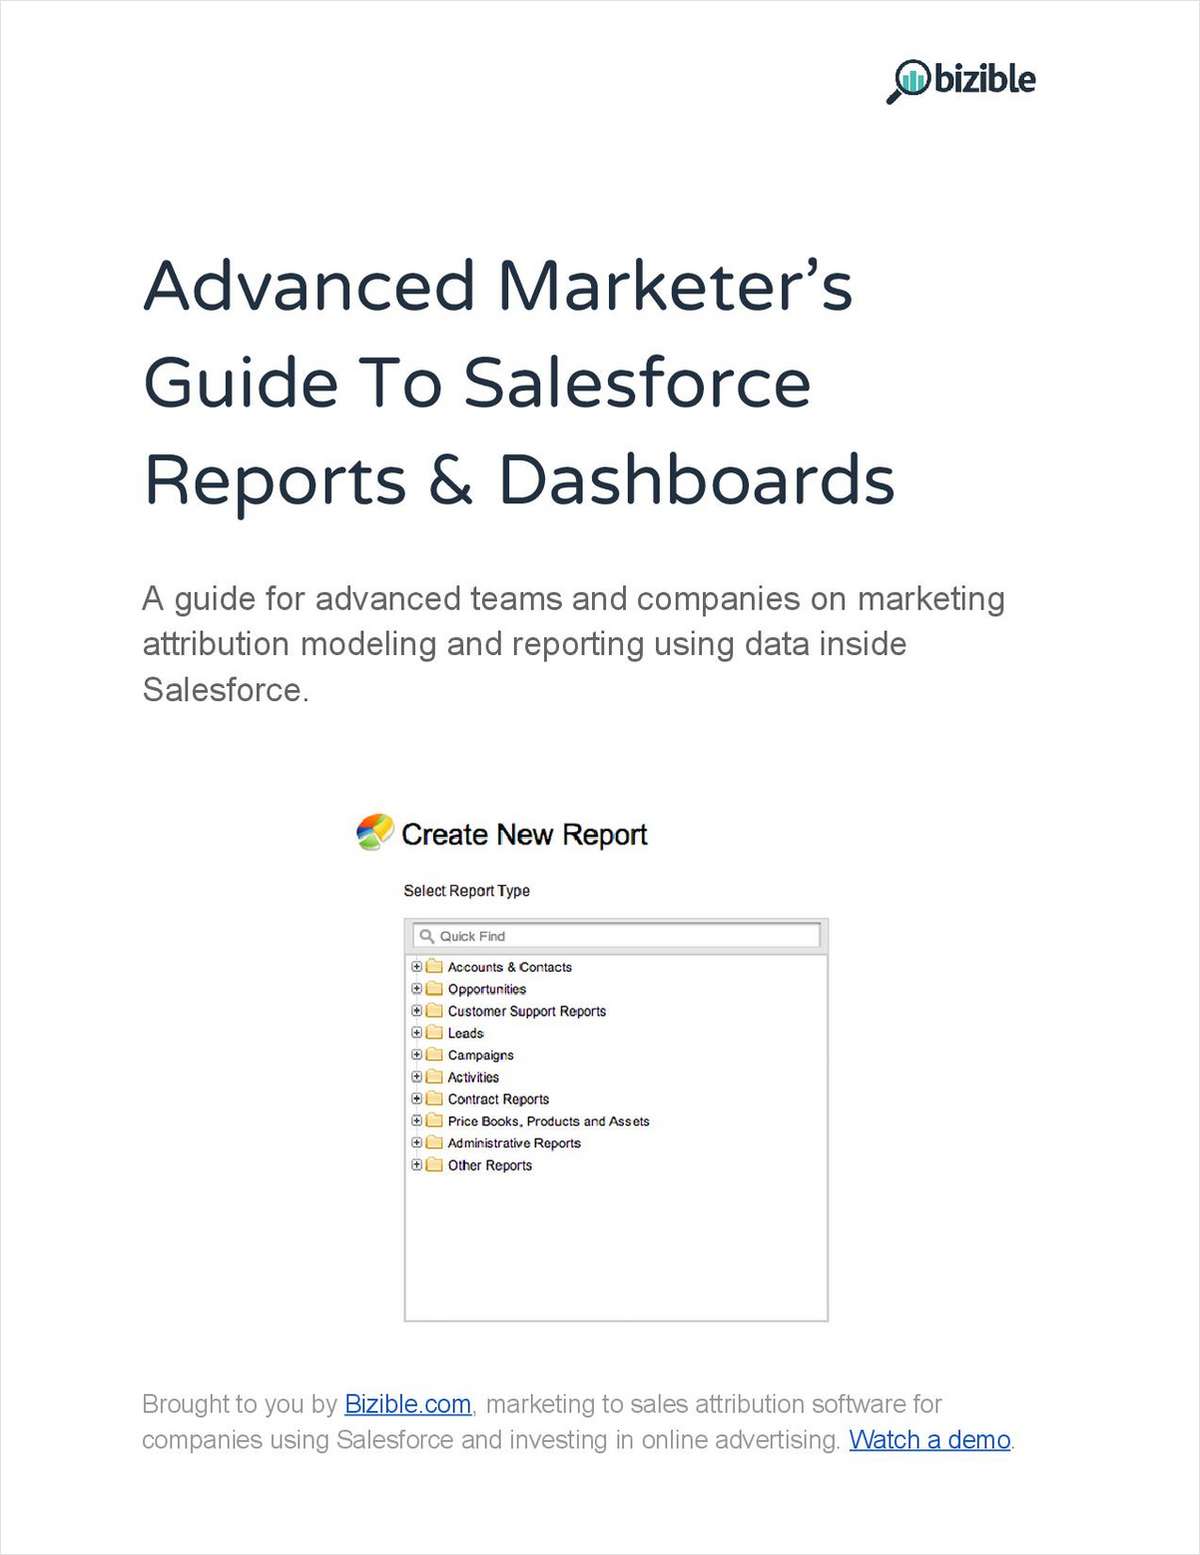 Advanced Marketer's Guide To Salesforce Reports & Dashboards